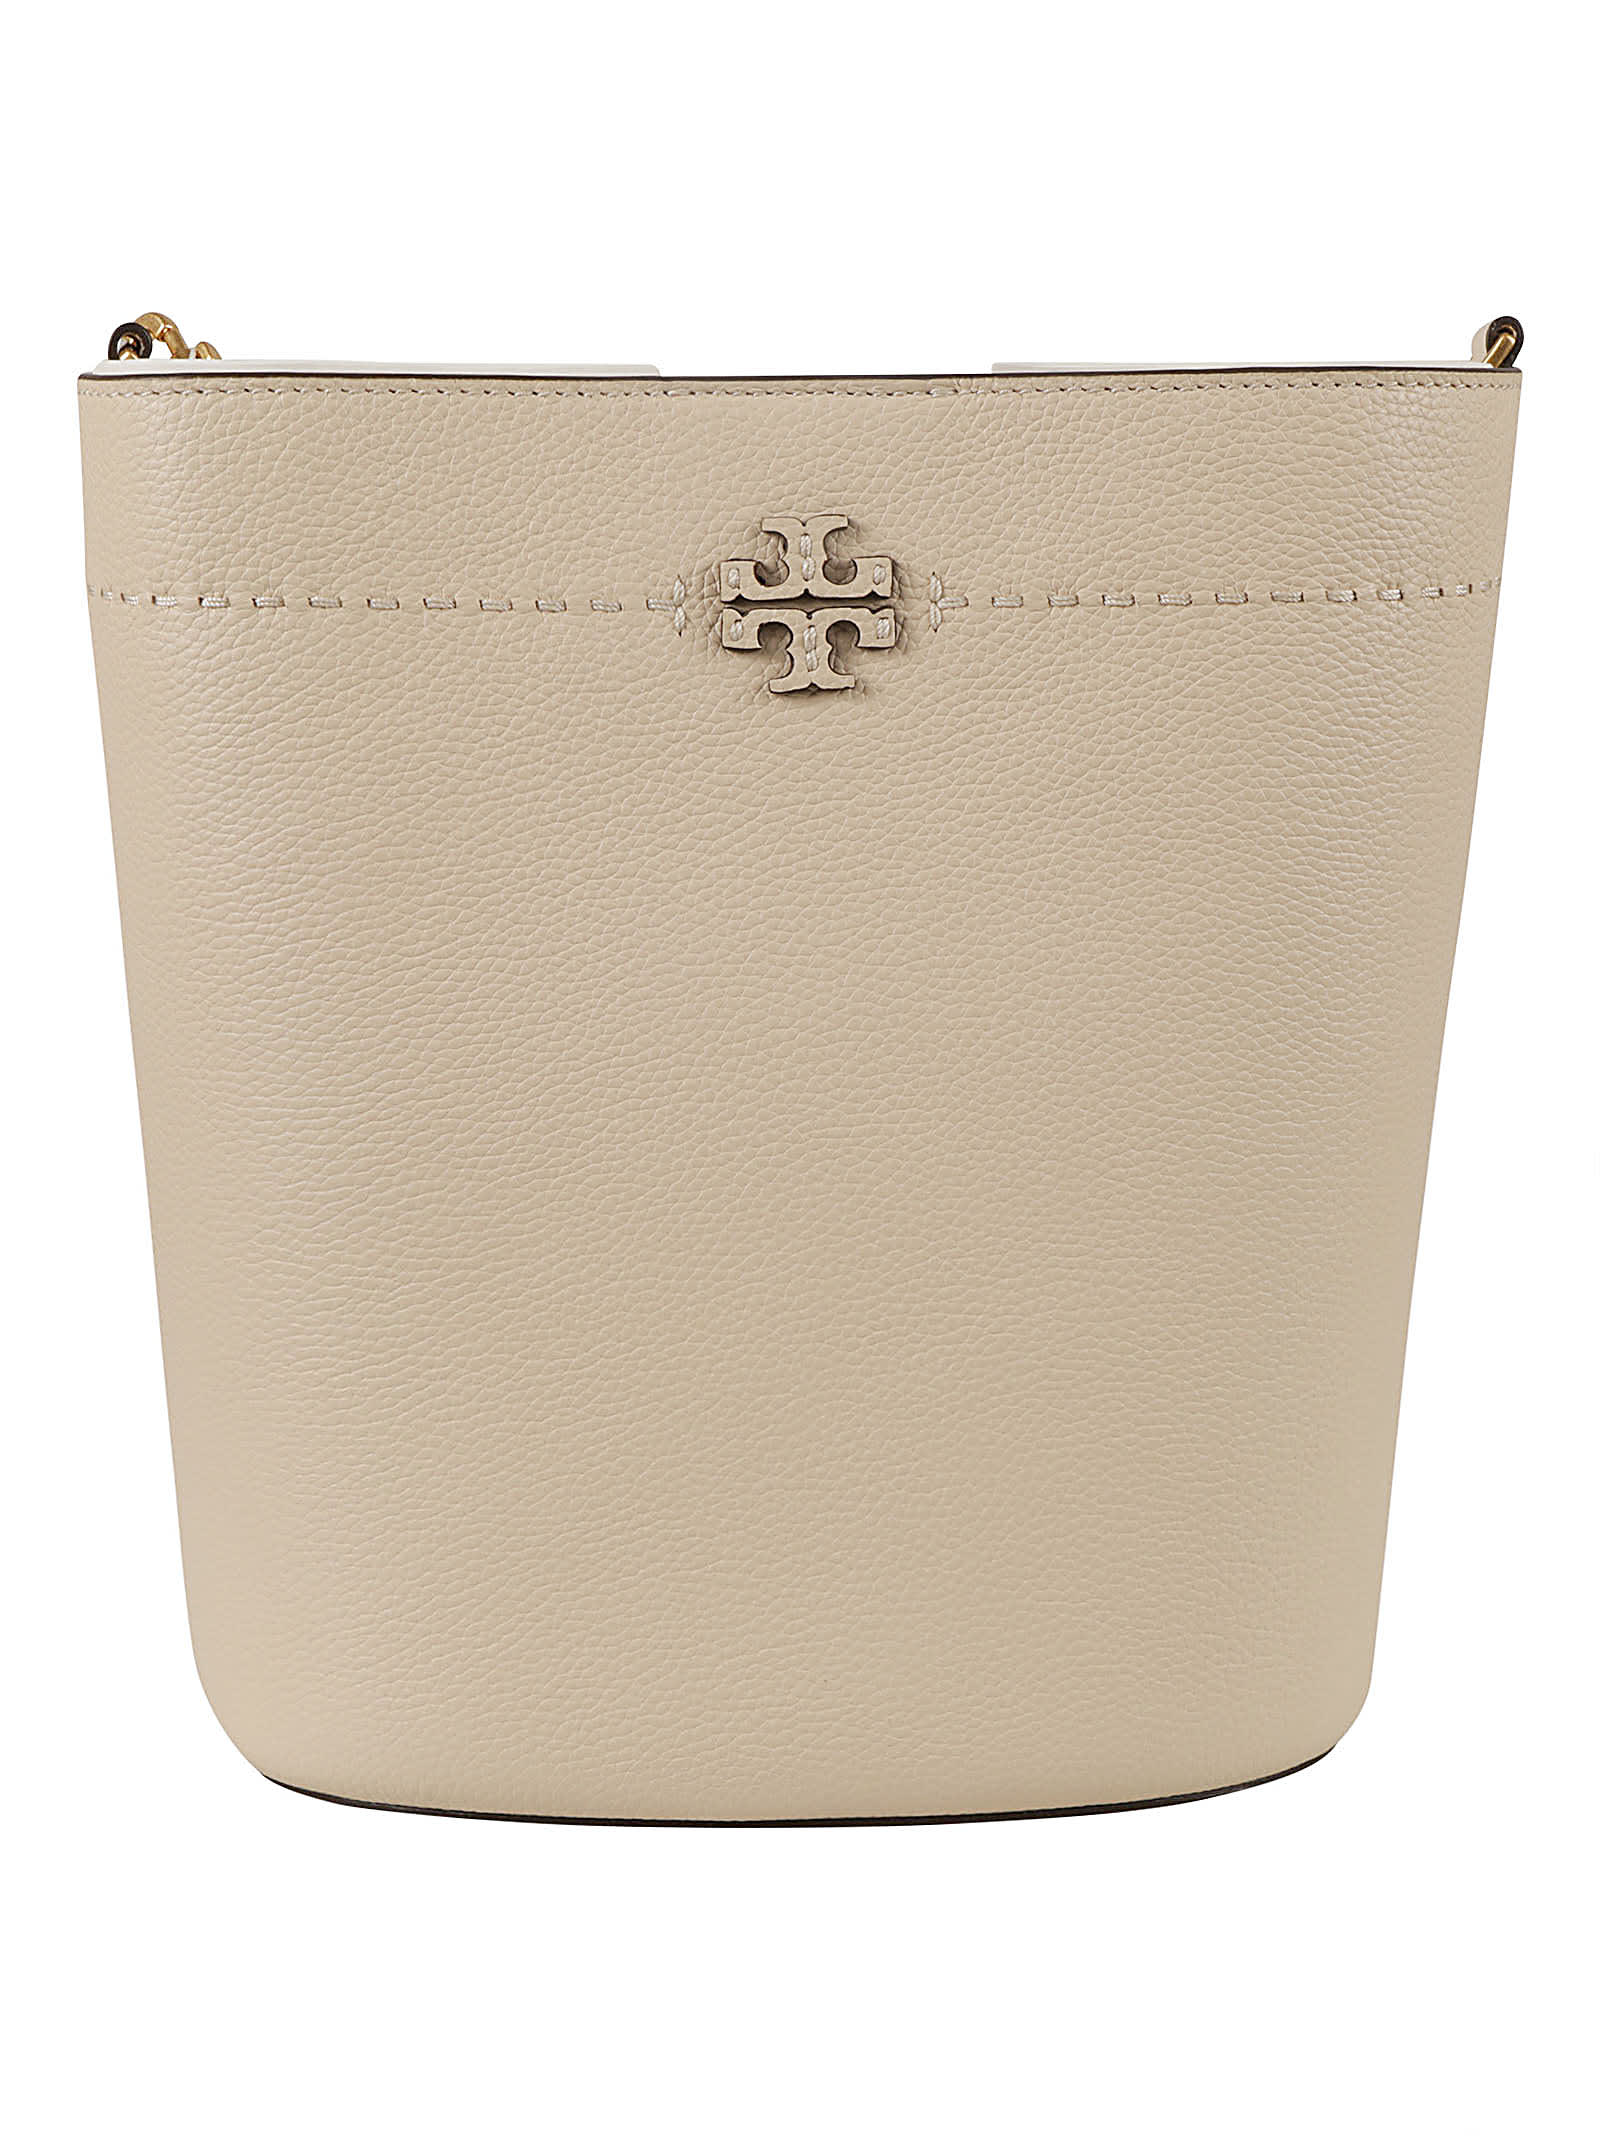 Tory Burch Mcgraw Bucket Bag In Brie